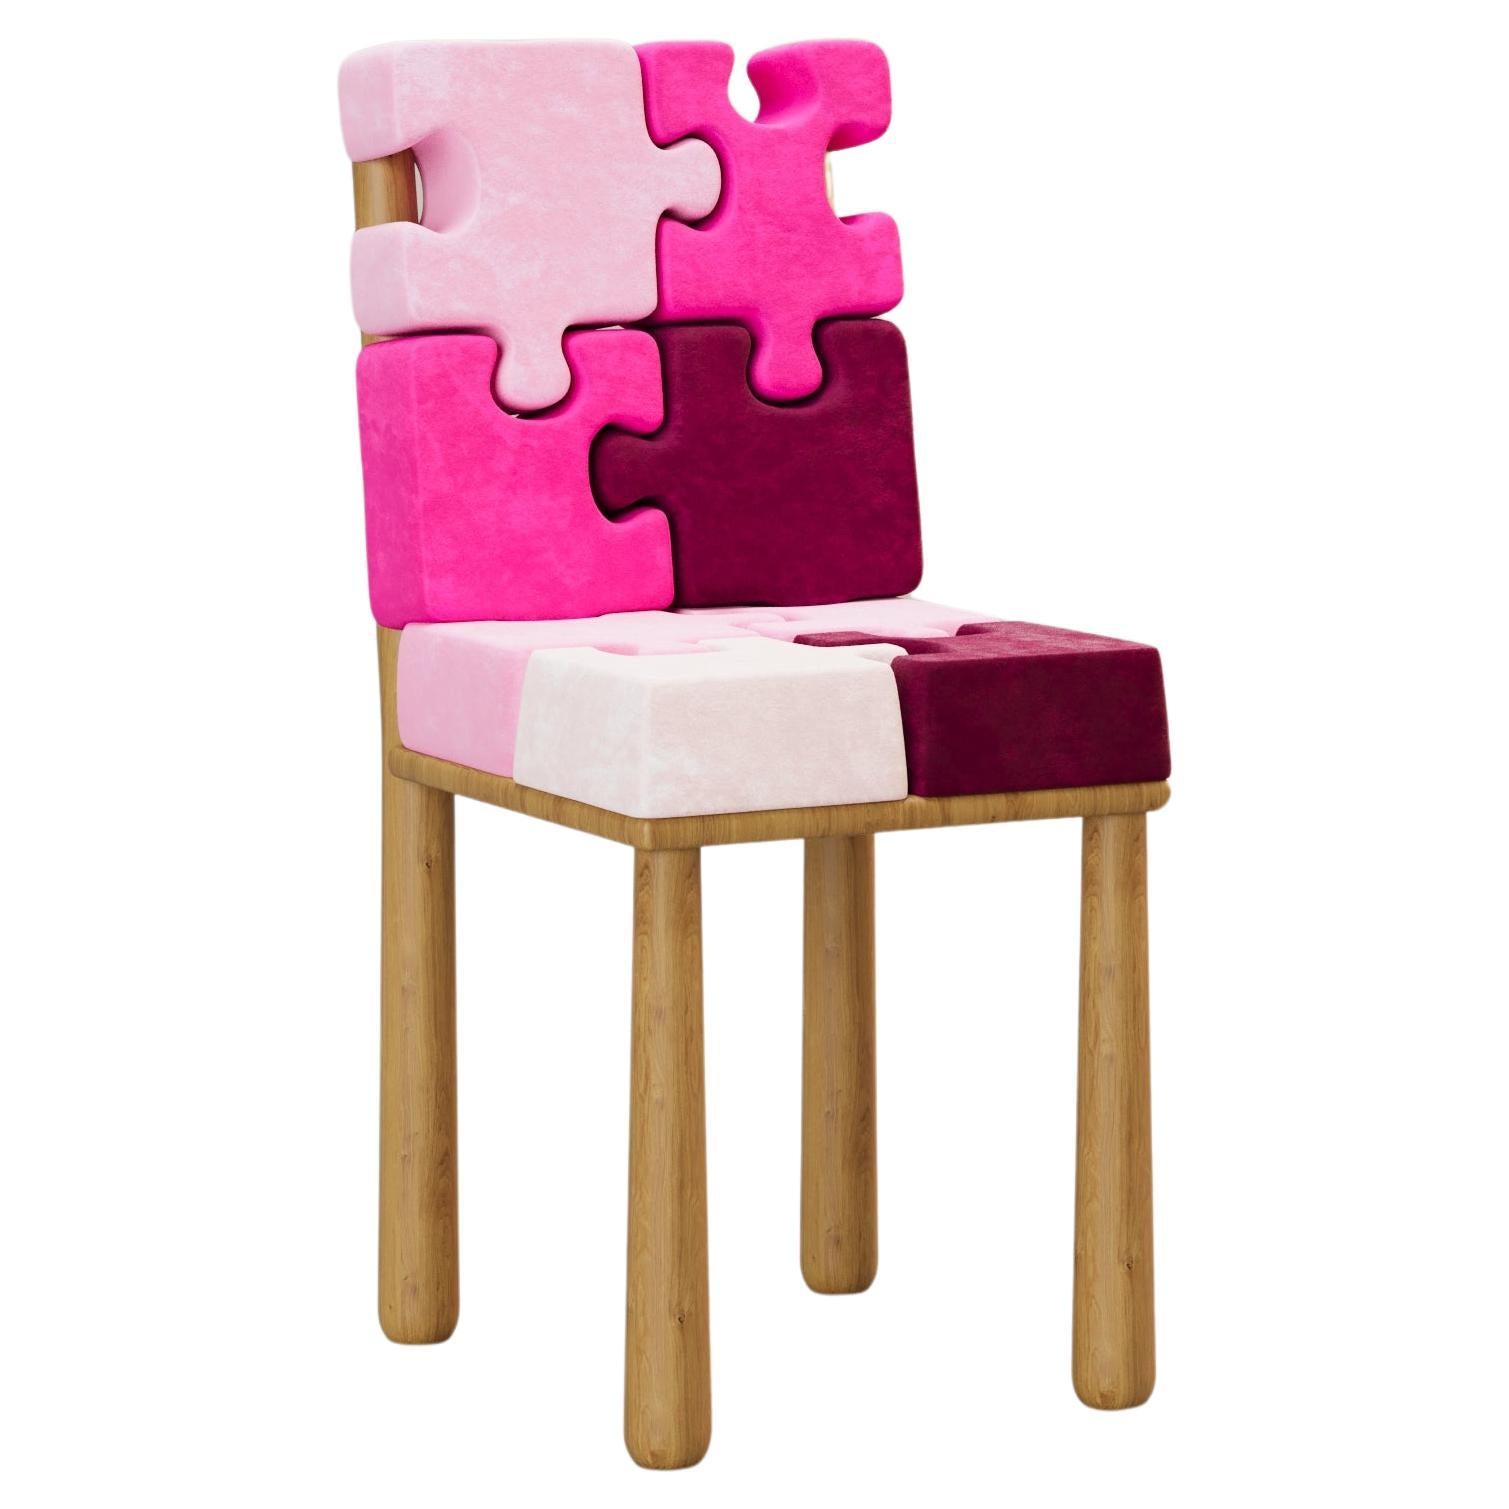 L'INSOLENTE Velvet Chair in Pink by Alexandre Ligios, REP by Tuleste Factory